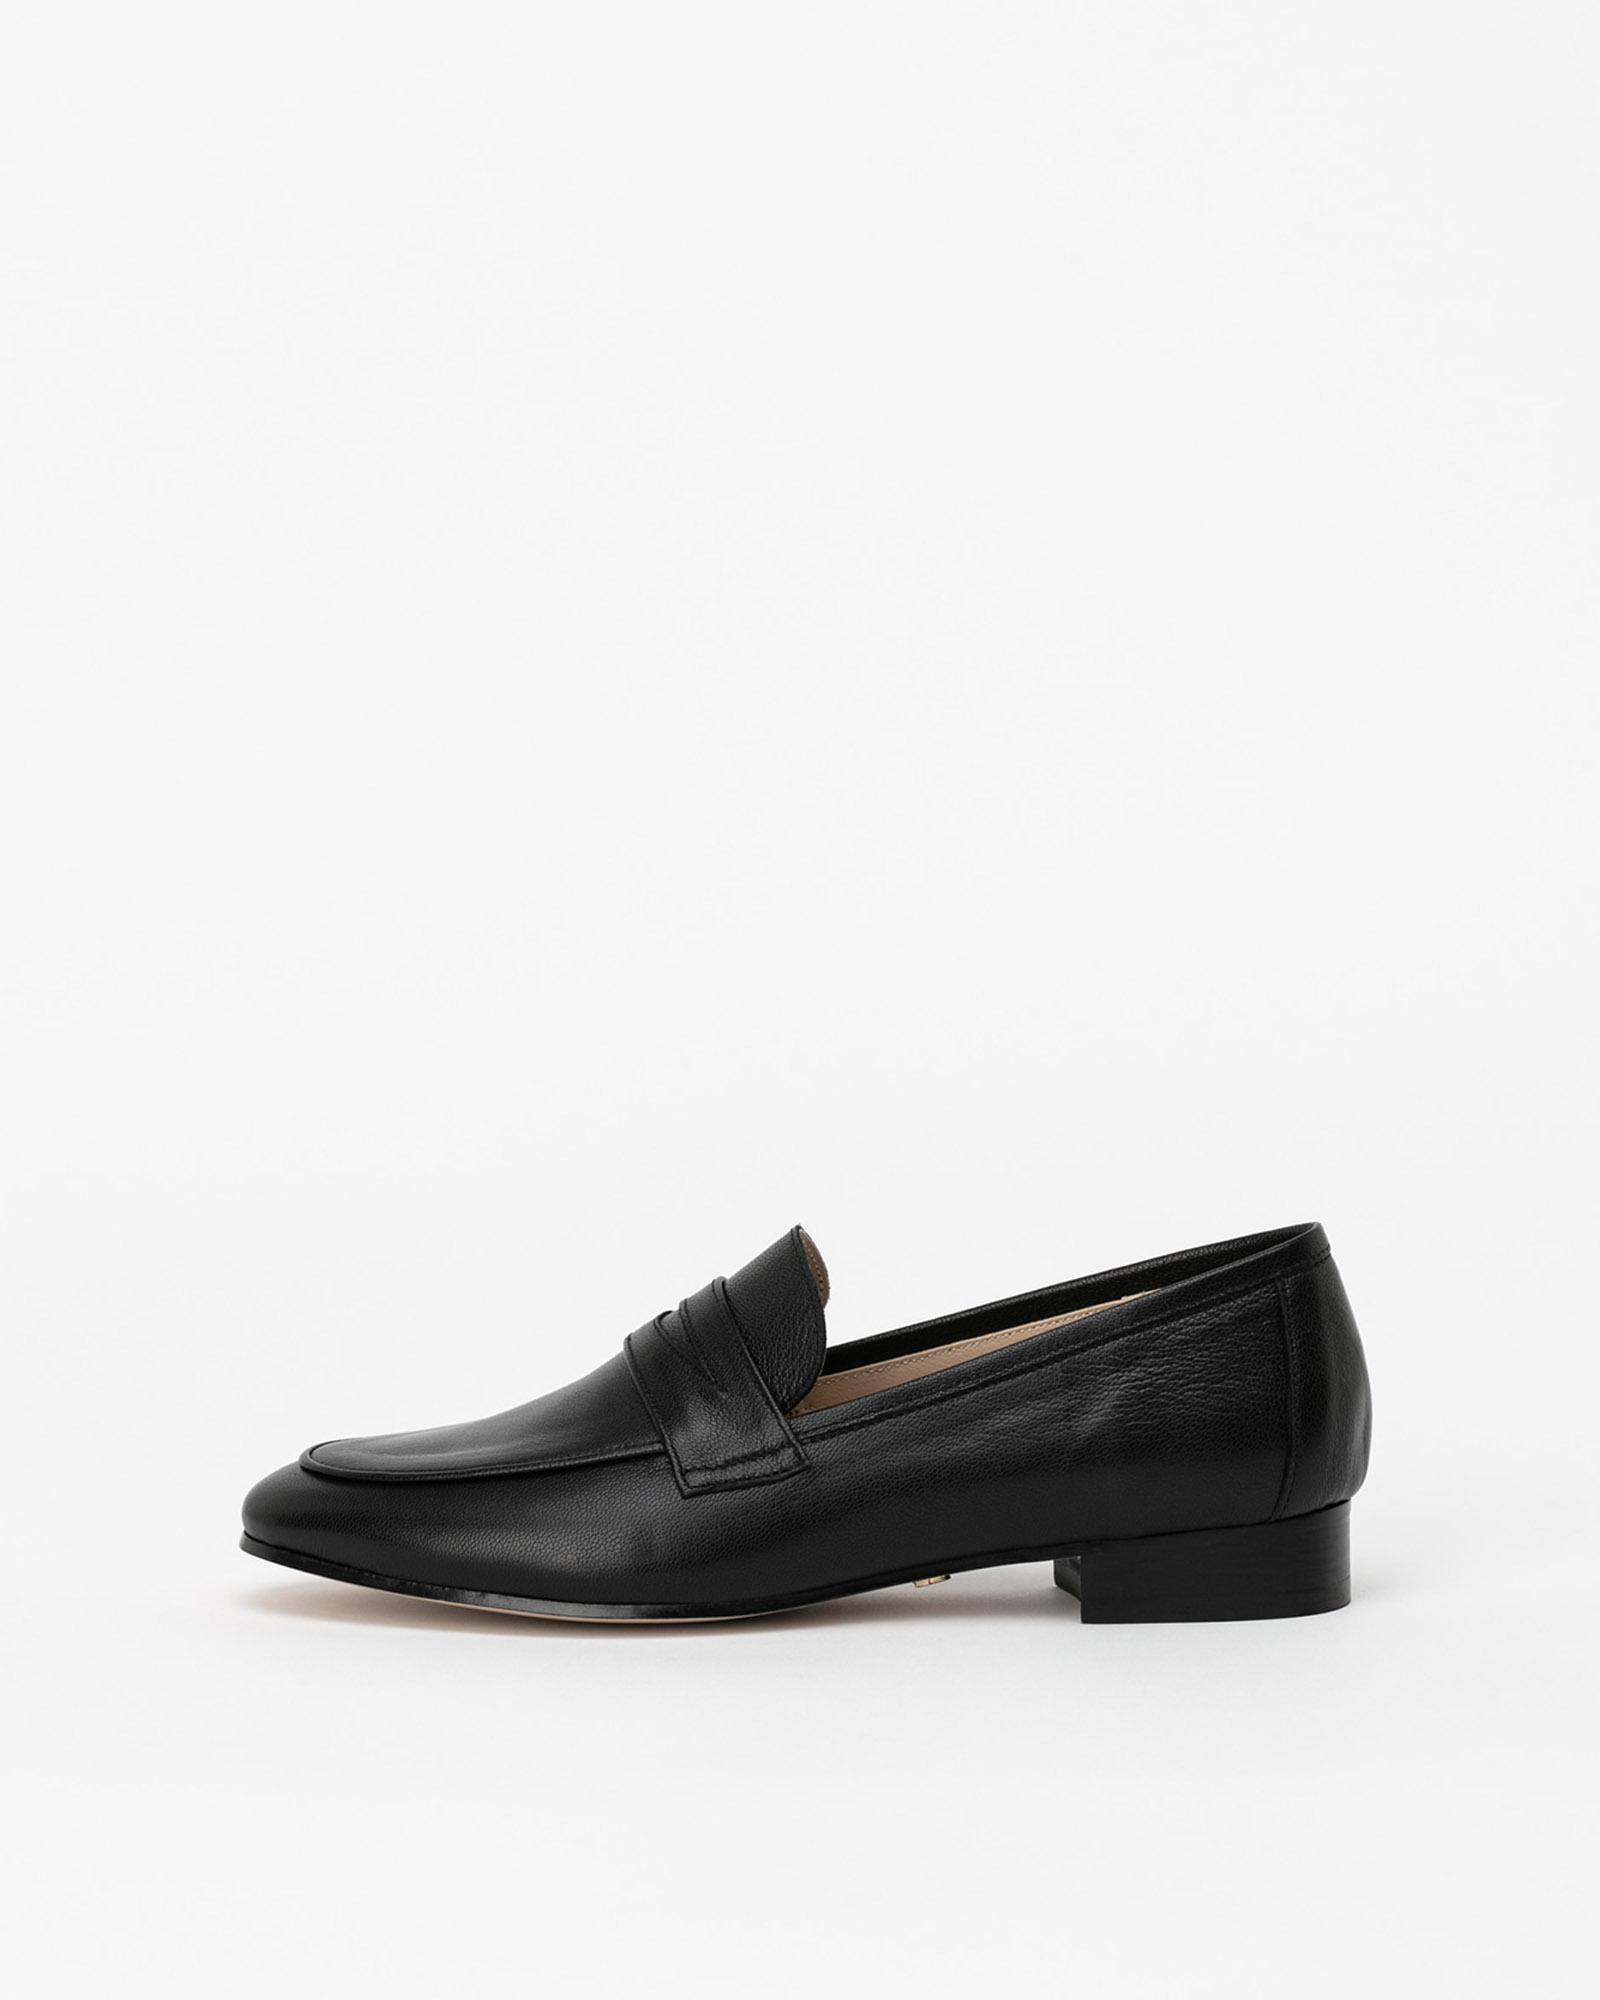 Sante Soft Loafers in Black